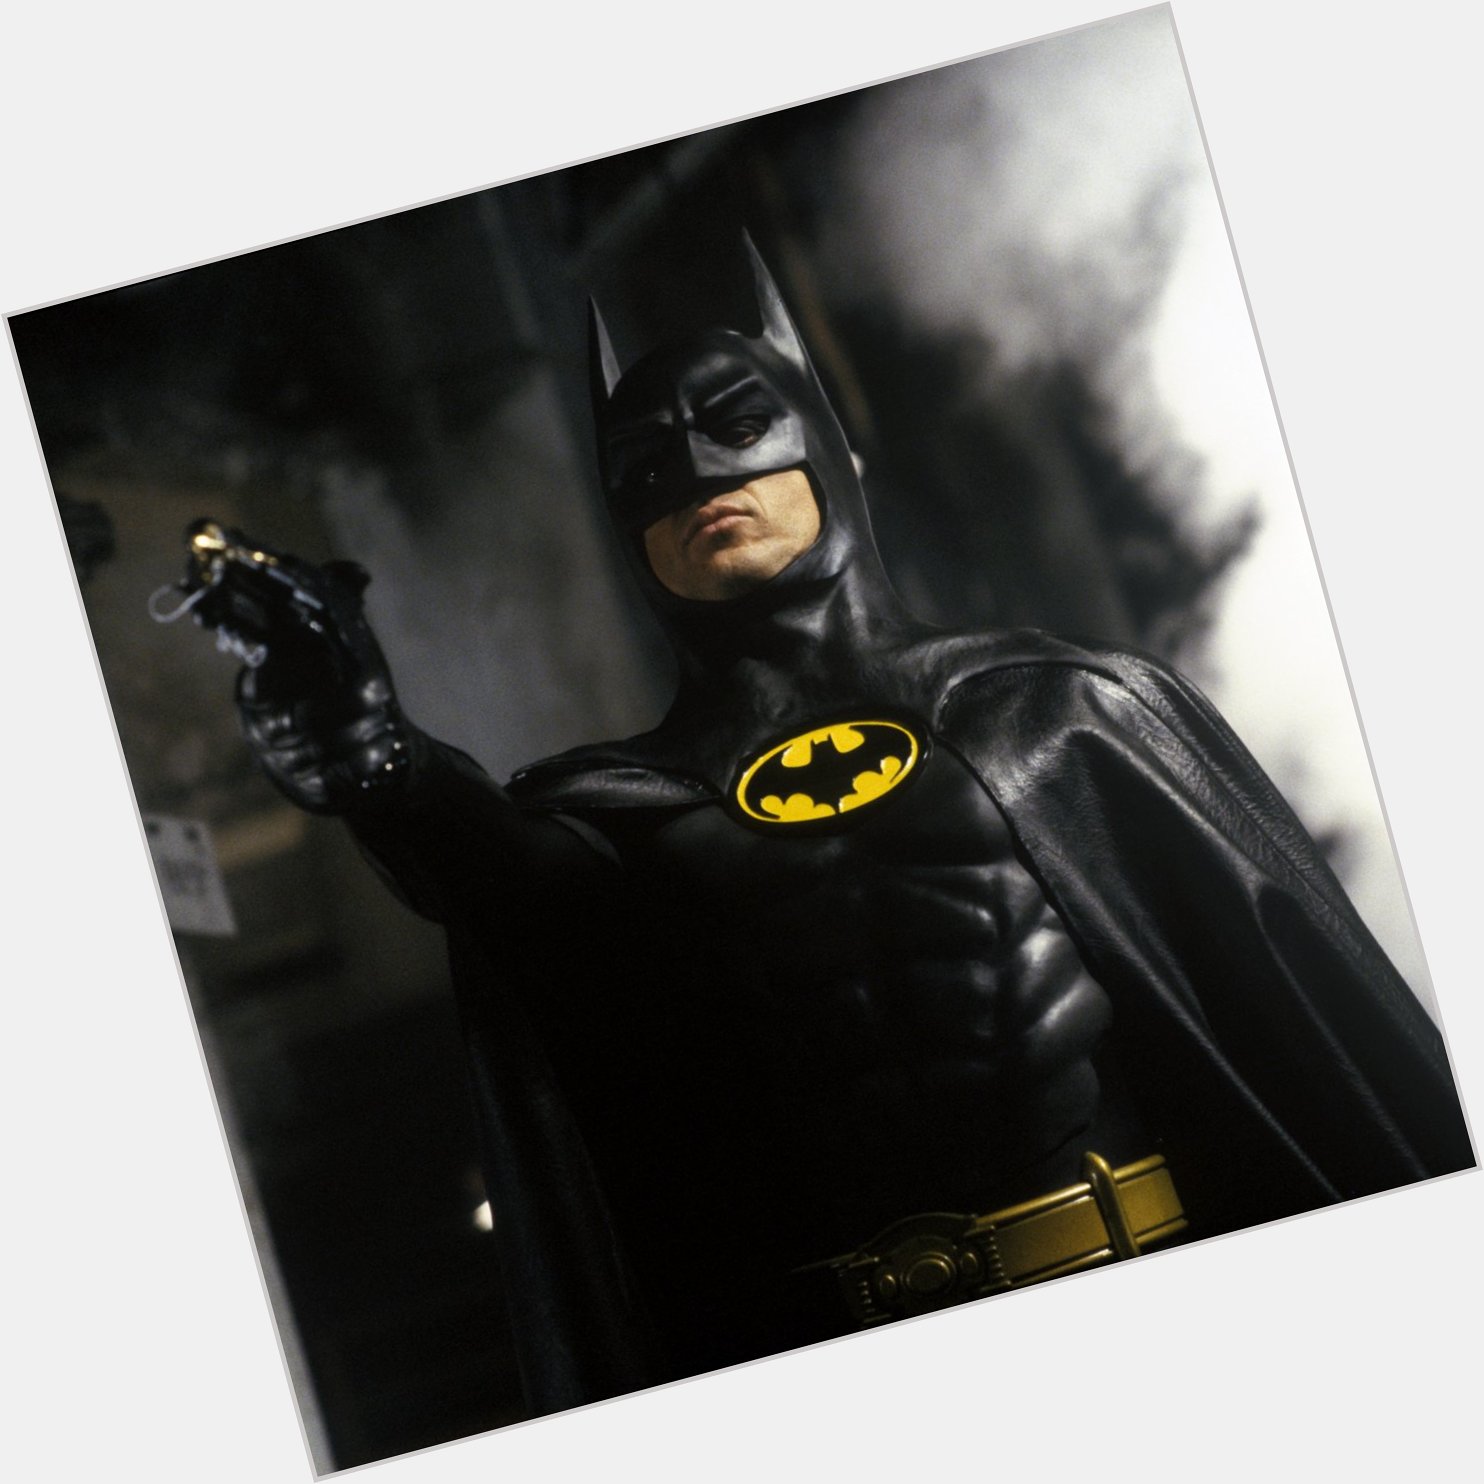 Michael Keaton s Batman will forever be iconic. Happy Birthday to the DC legend! 